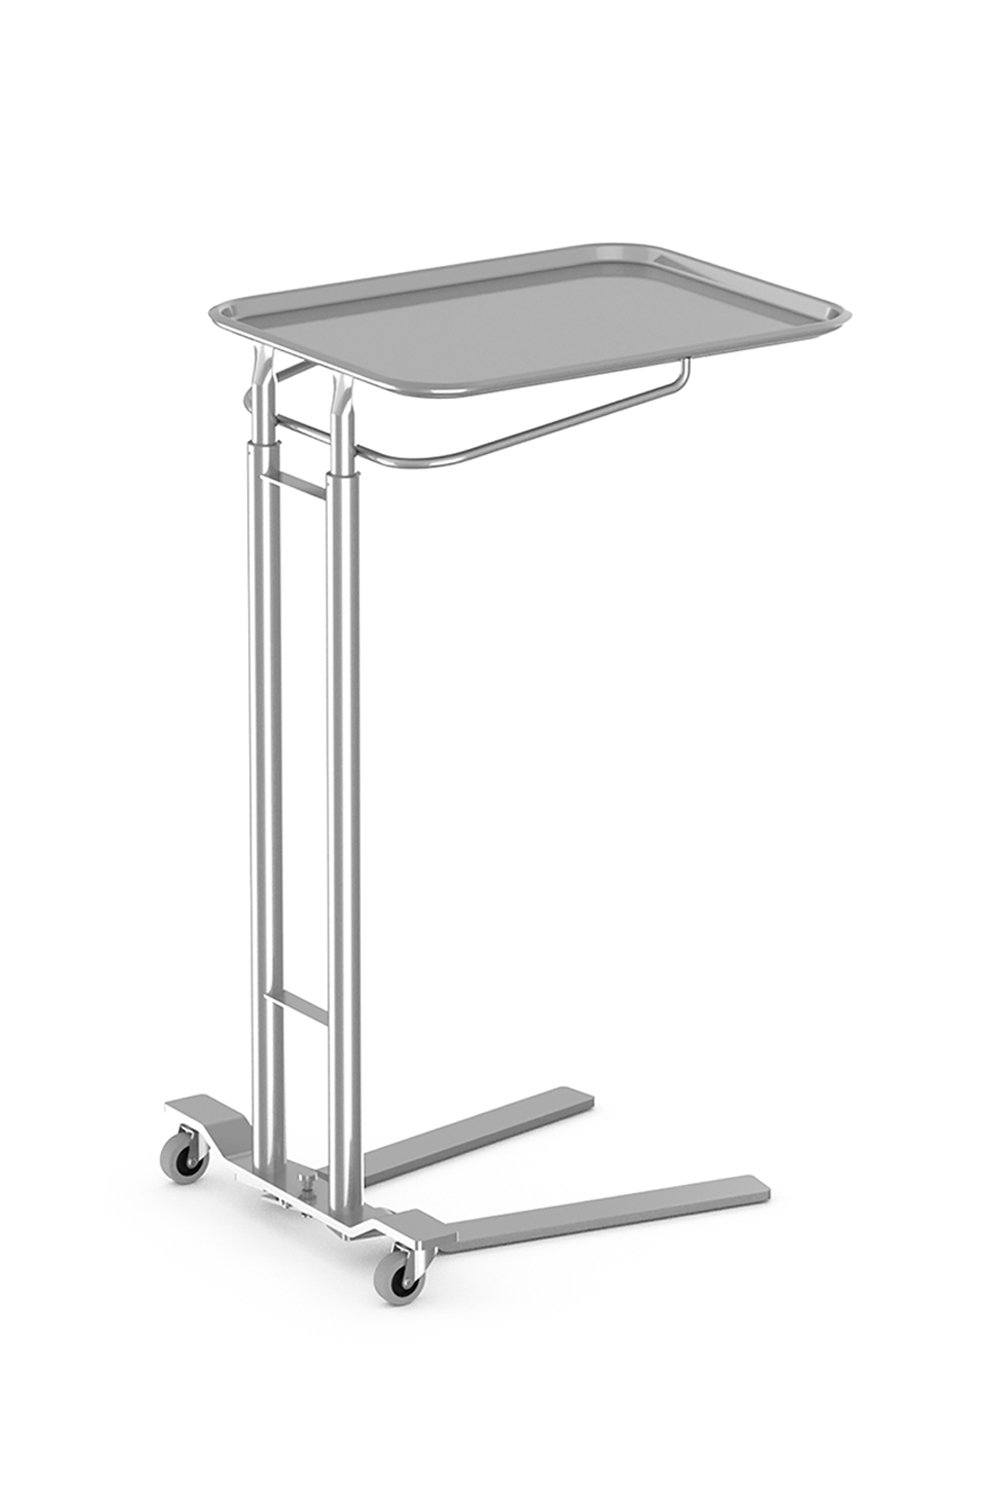 Mayo Stand Stainless Solutions Acart 16-1/4"D x 21-1/4"W x 36"W-58"H Foot Operated 16" x 21"